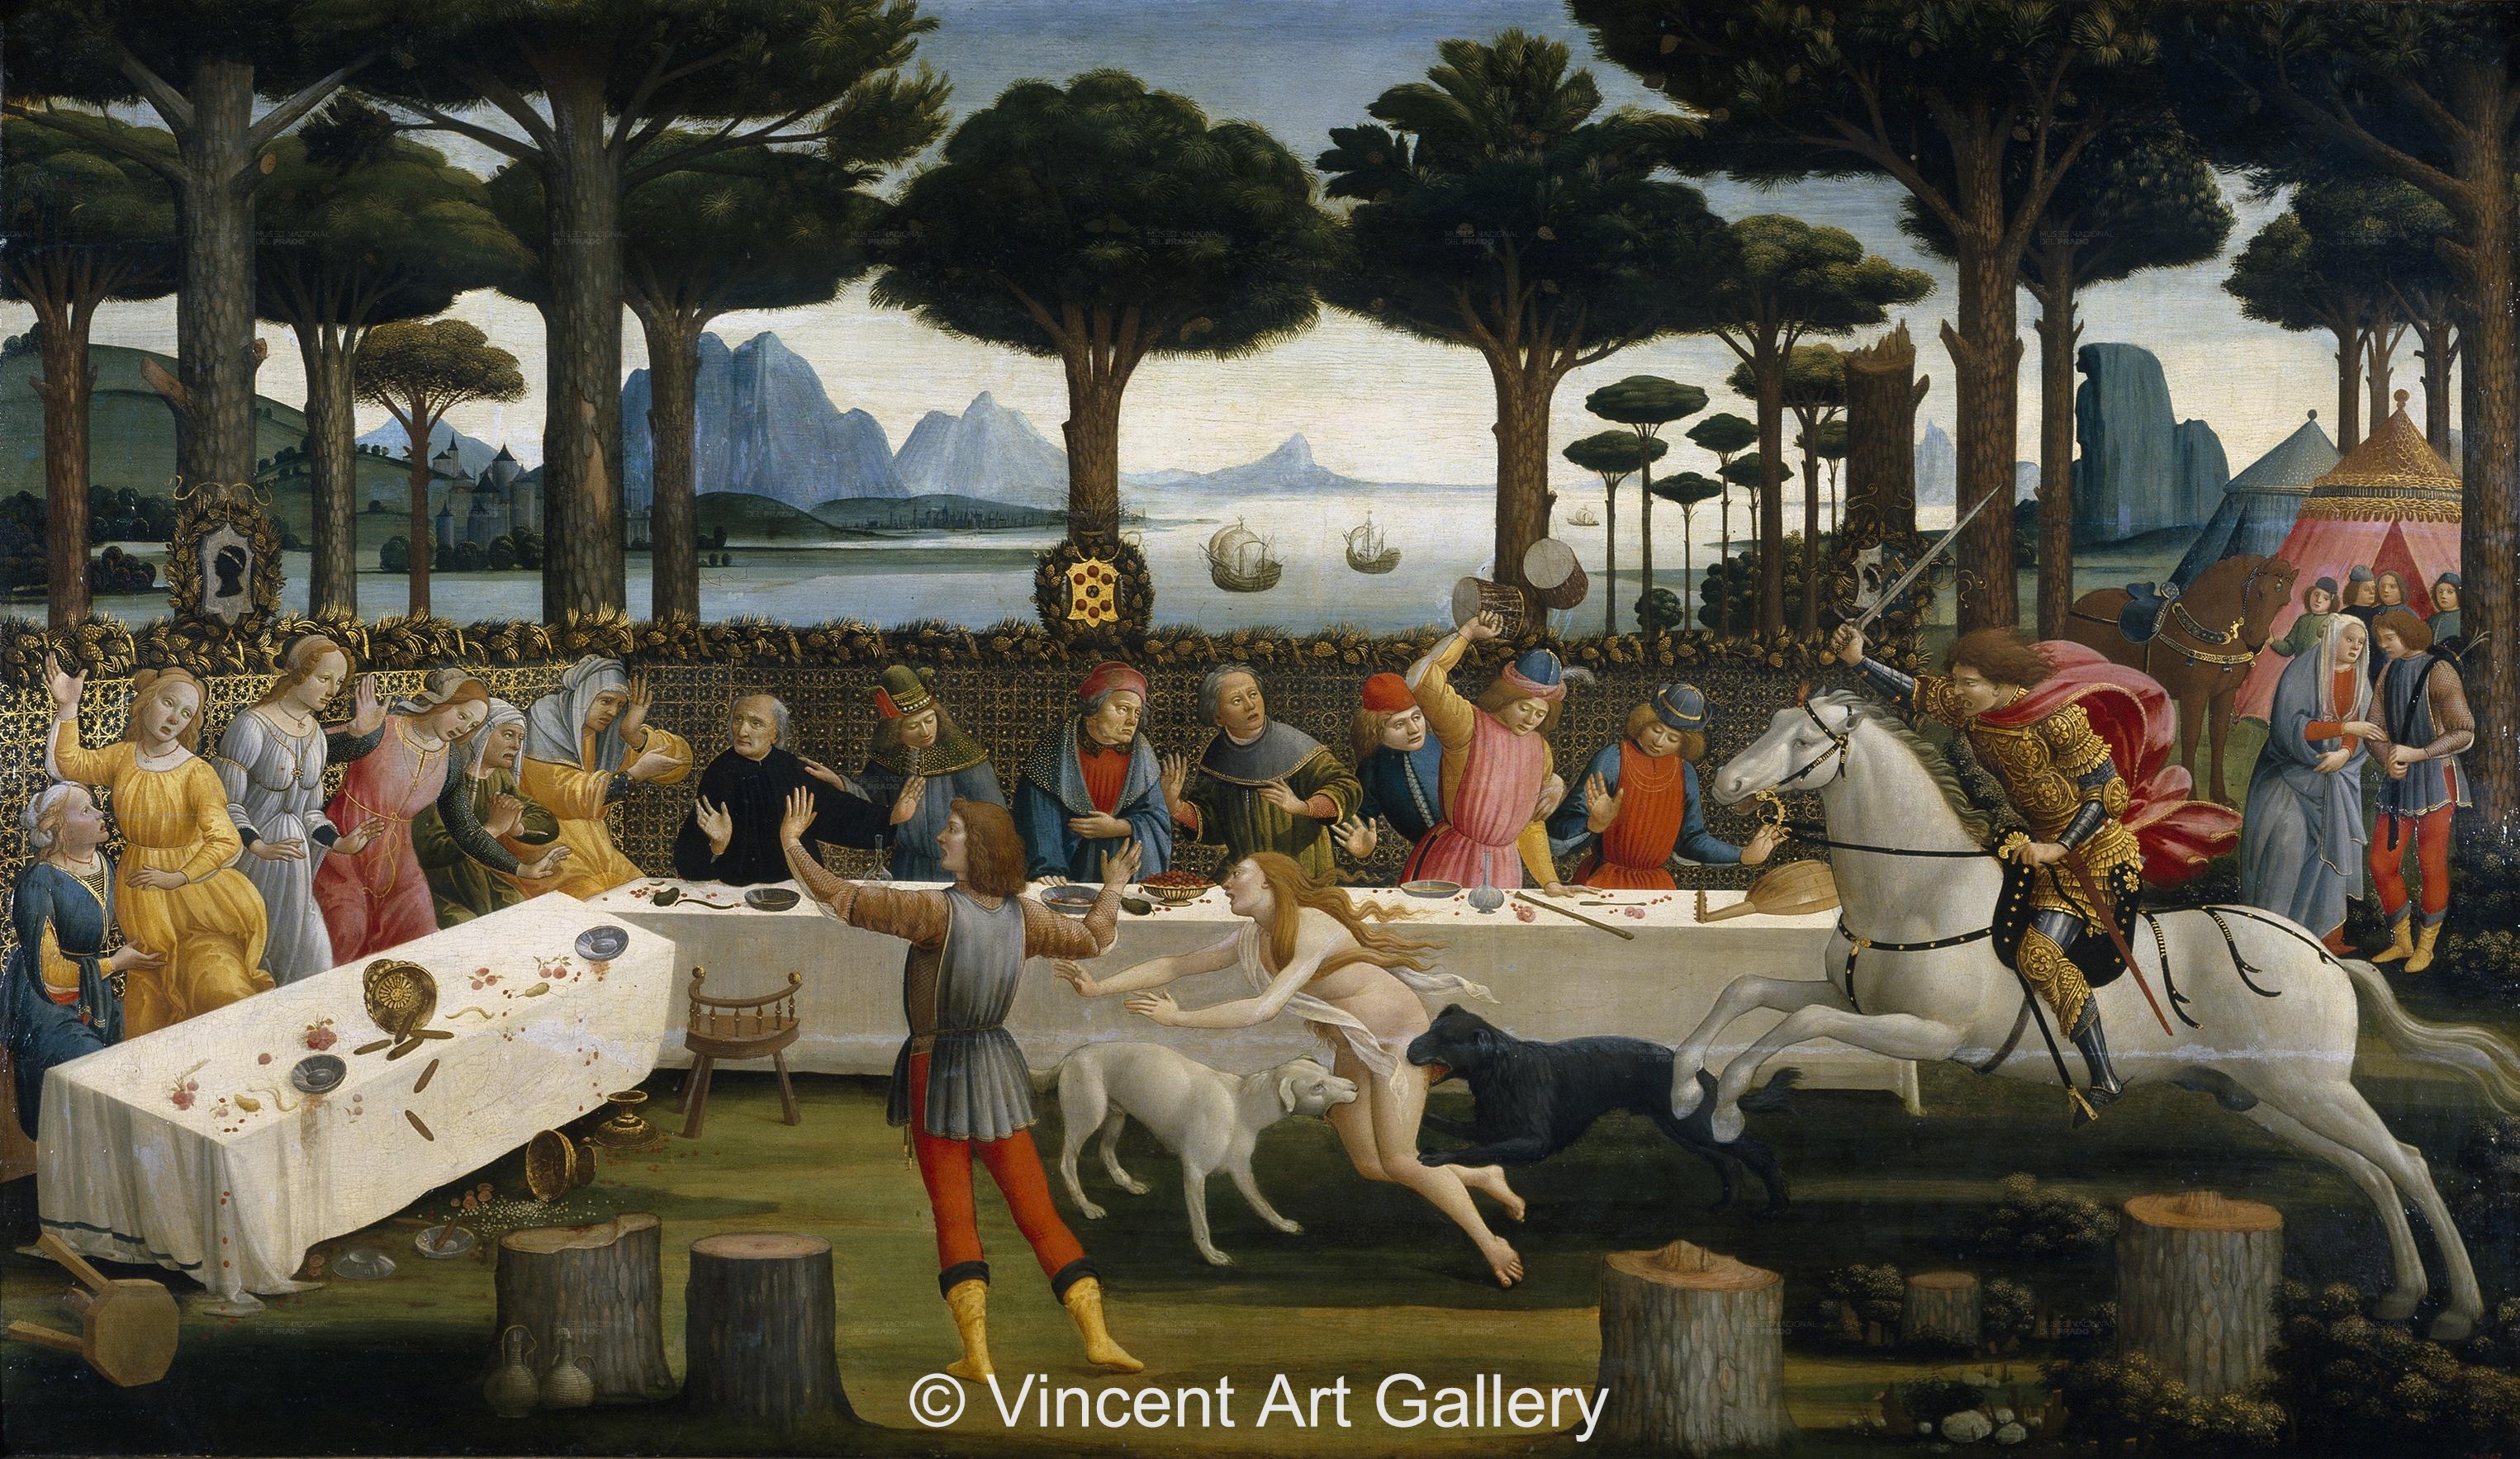 A751, BOTICELLI, The Banquet in the Pine Forest